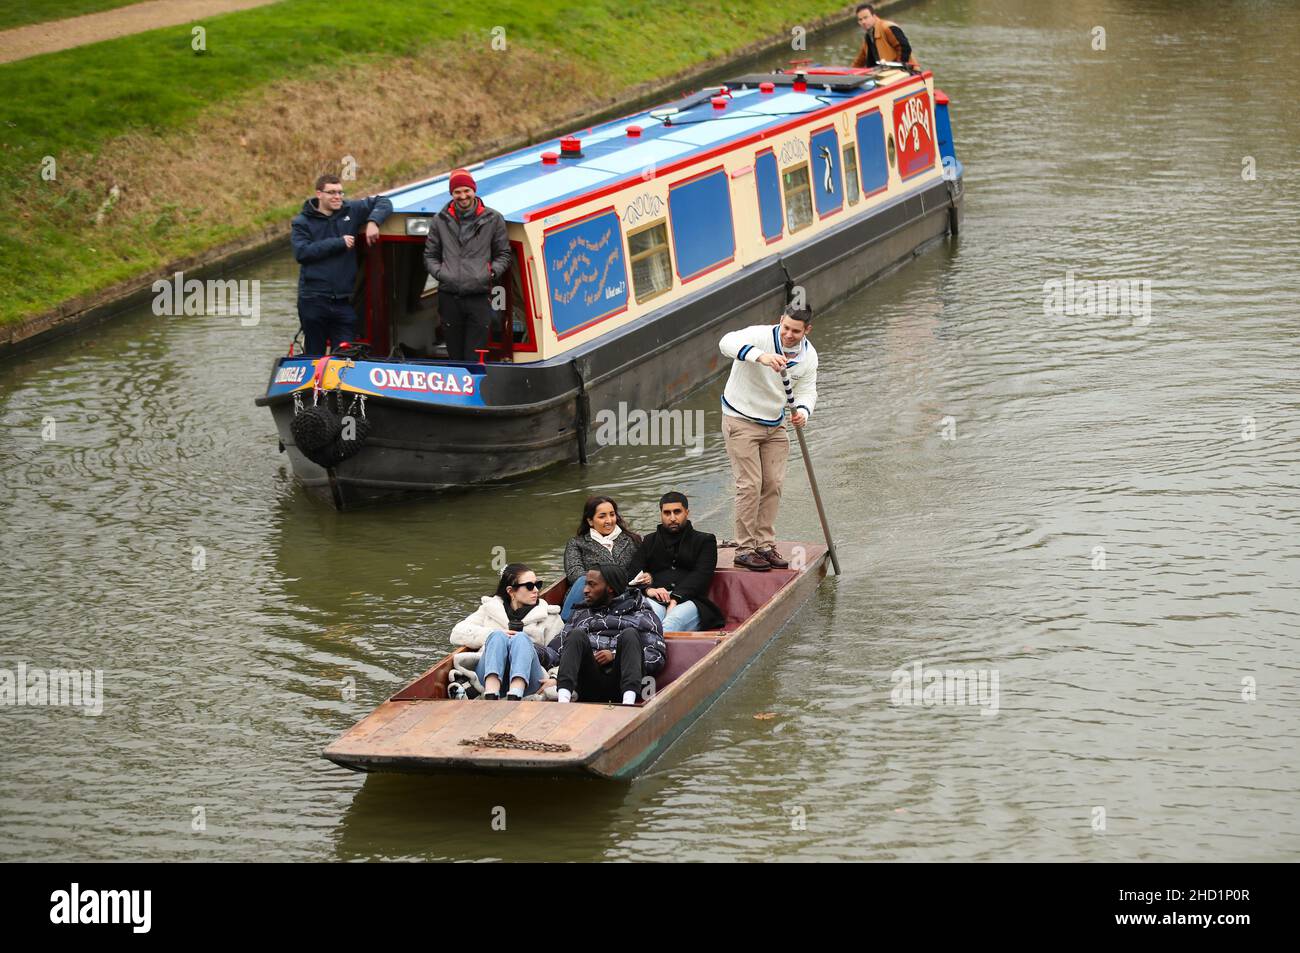 Narrowboat Omega 2 makes its way along the College Backs on the river Cam in Cambridge. A privilege afforded to Narrowboats once a year on New Years D Stock Photo